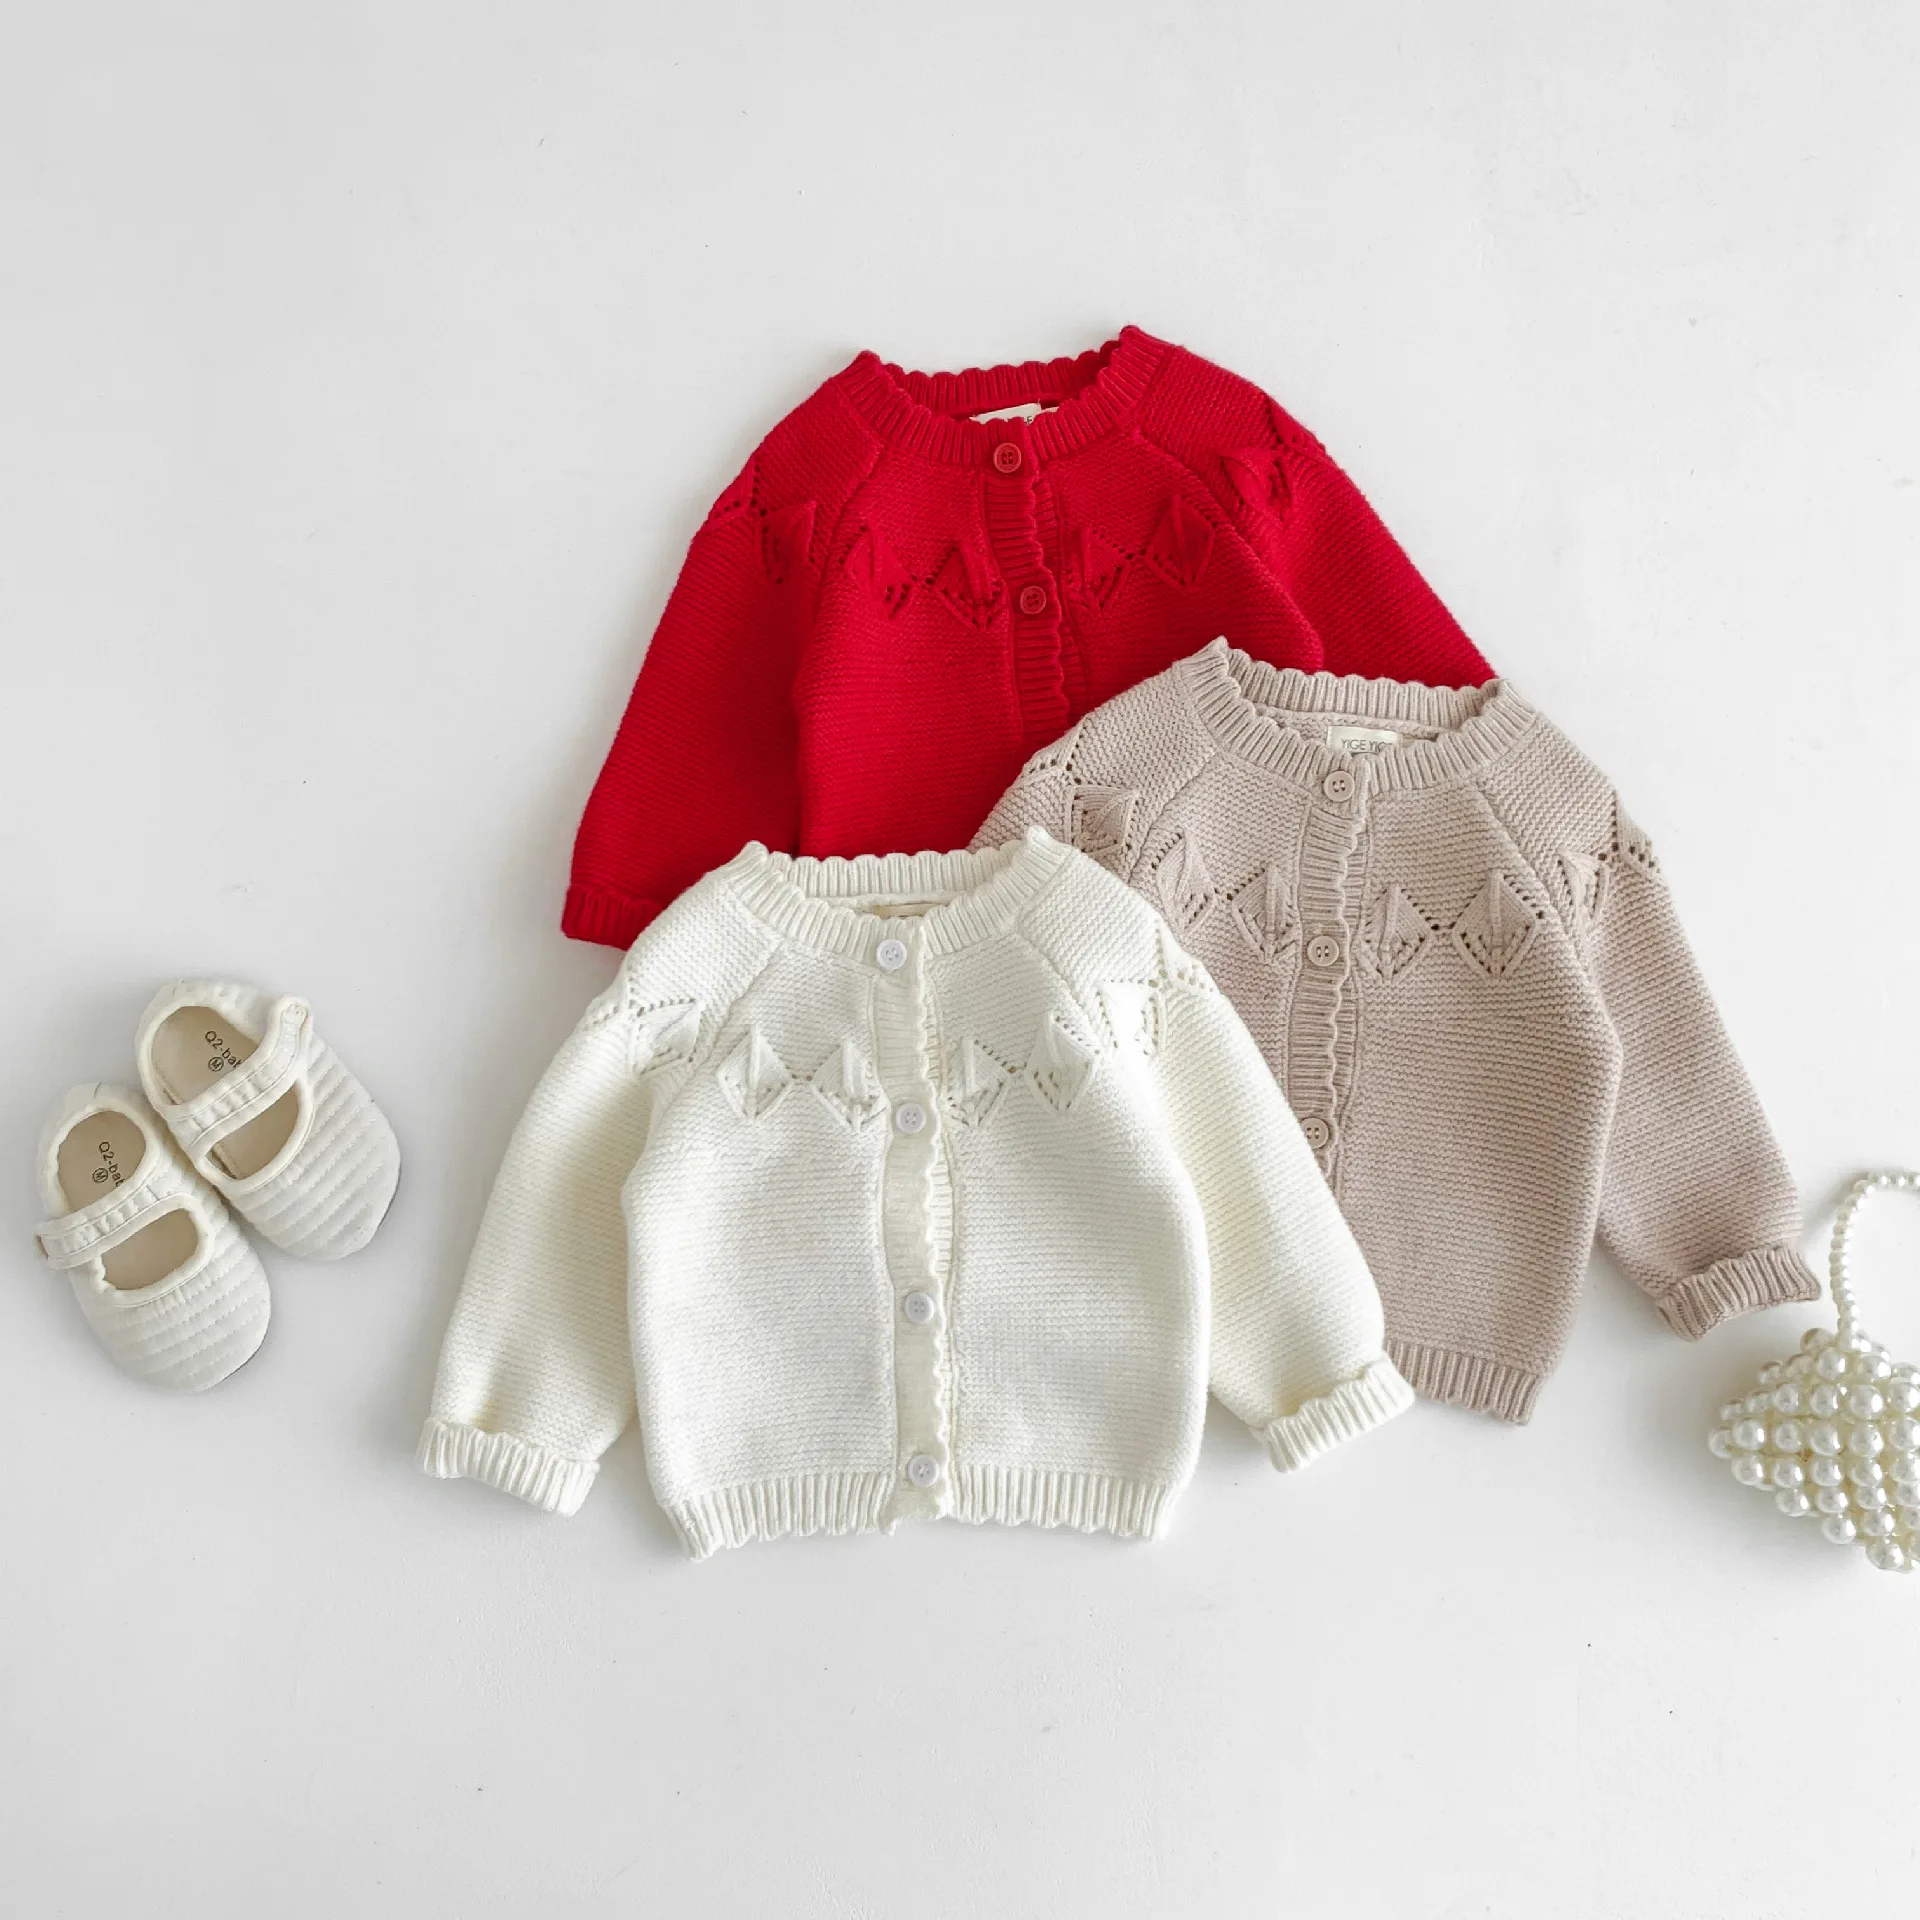 

New Autumn Knitwear Infant Knitsuit Newborn Girl Knitted Cardigan Fashion Sweater Boy Baby Casual Cotton Tops Coat Kid Jacket